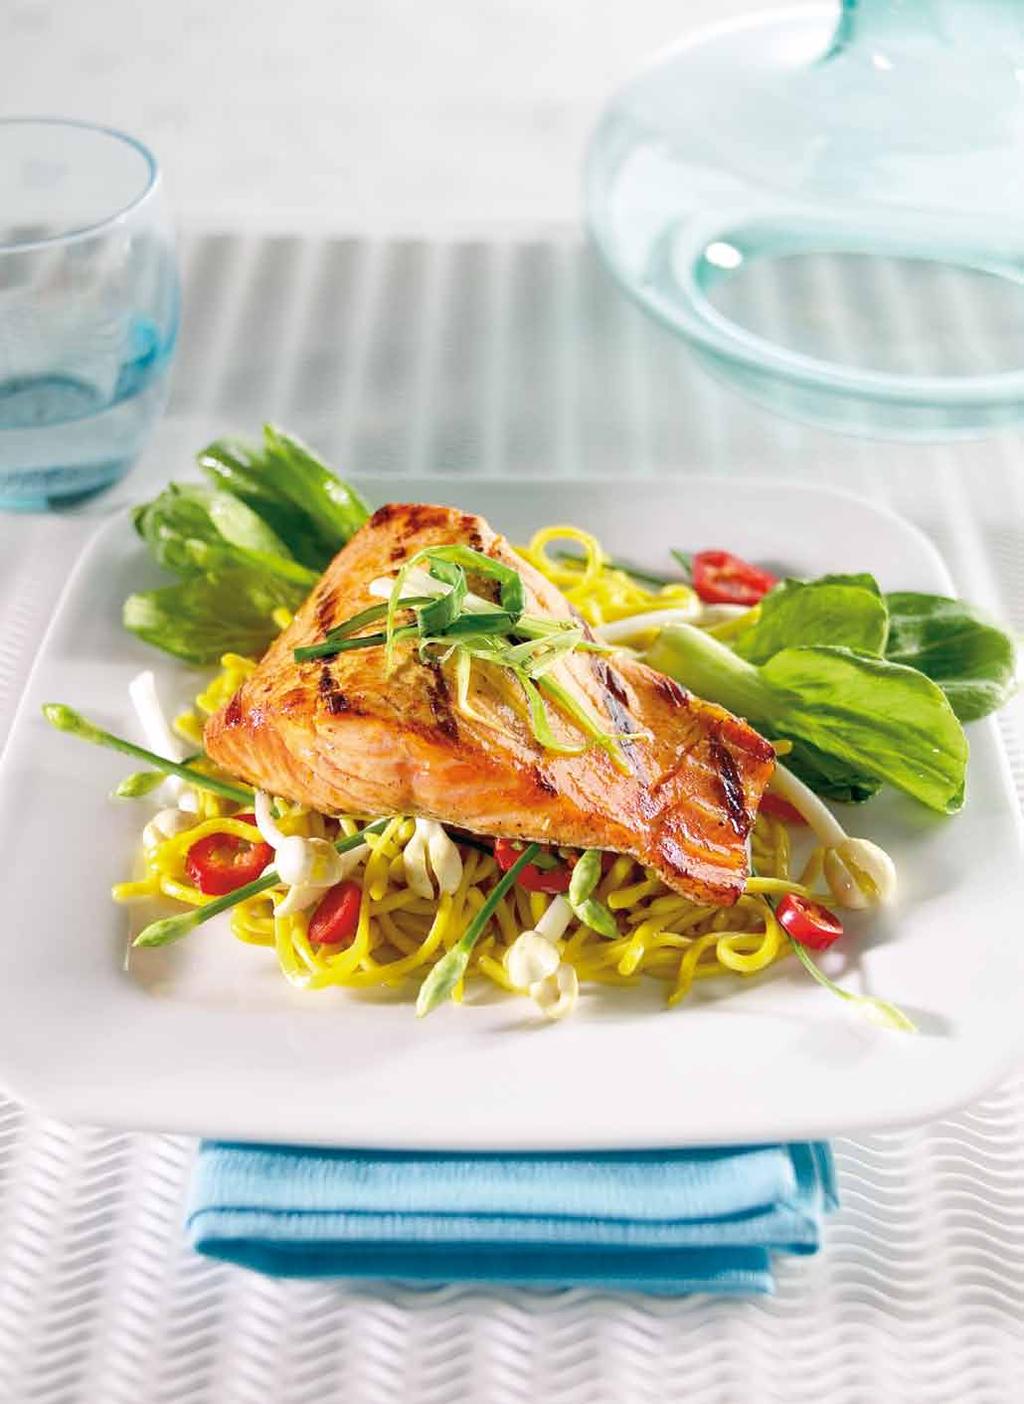 Orange & Ginger Salmon Serves 2 / 300 calories / 30g protein / 9g carbohydrate / 17g fat / 3g saturates 300 DINNER 2 tbsp tamari soy sauce 1 garlic clove, crushed 1 tsp finely grated fresh root